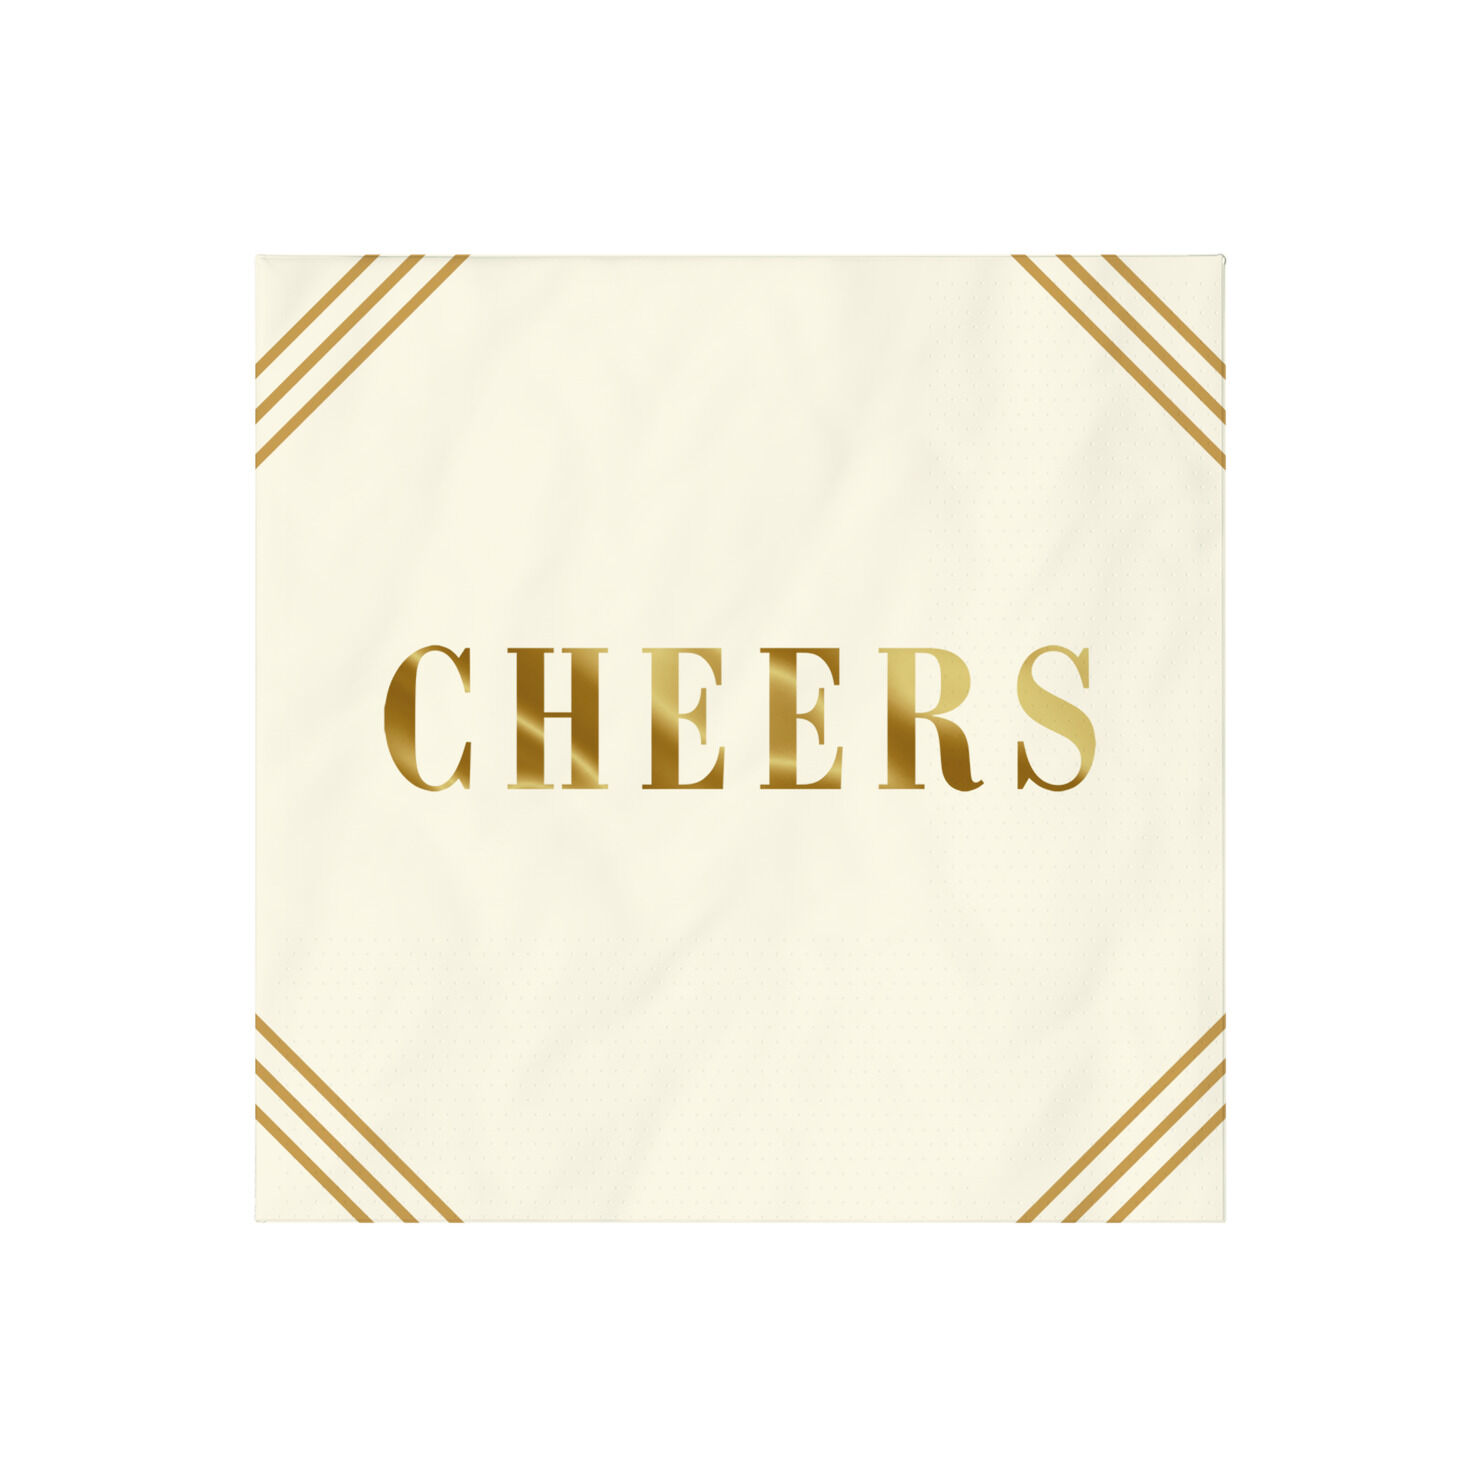 Ivory and Gold "Cheers" Cocktail Napkins, Set of 16 for only USD 4.49 | Hallmark